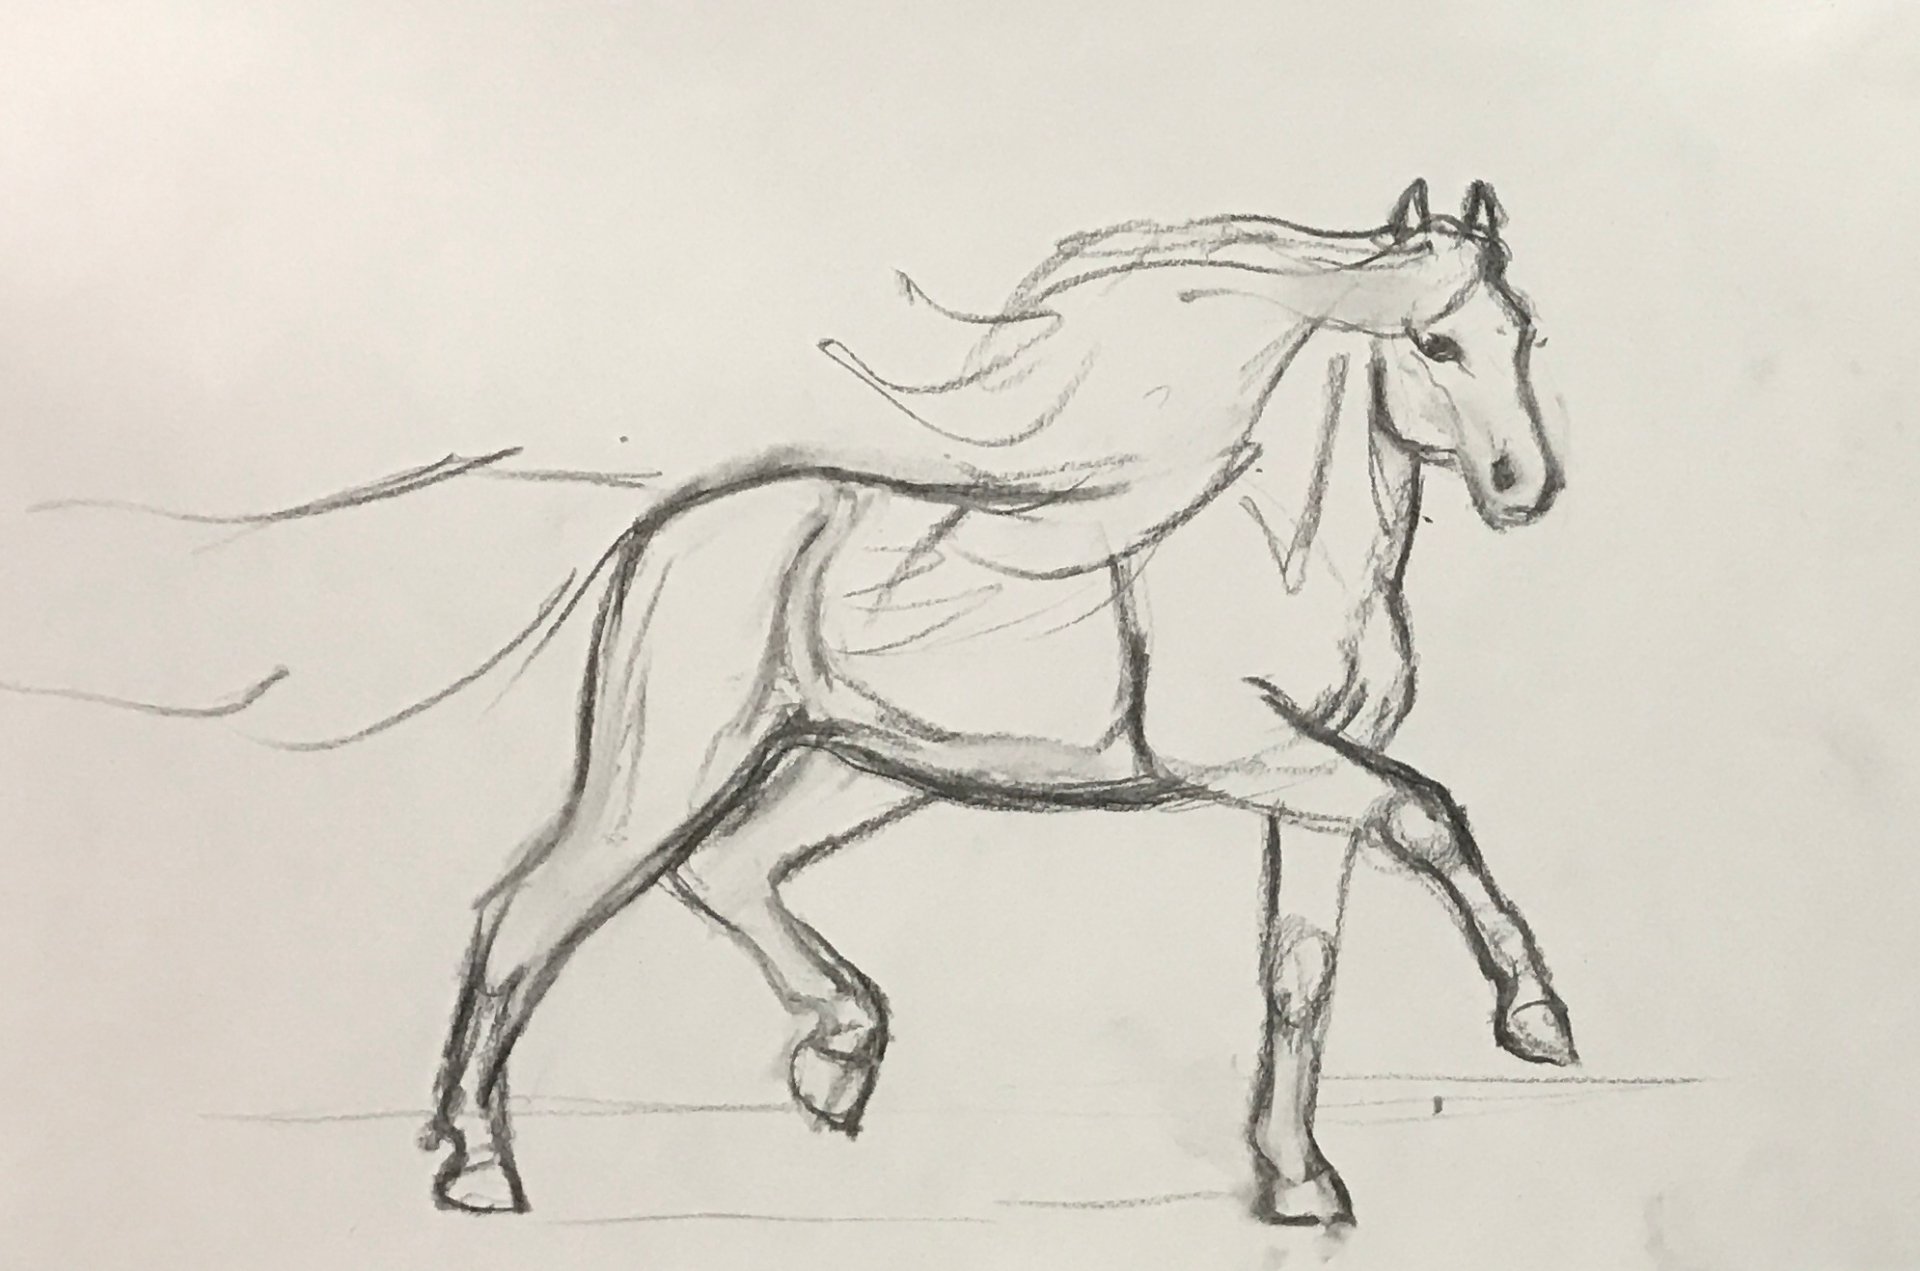 Sketching and Pencil Shading Classes for Intermediates (Online